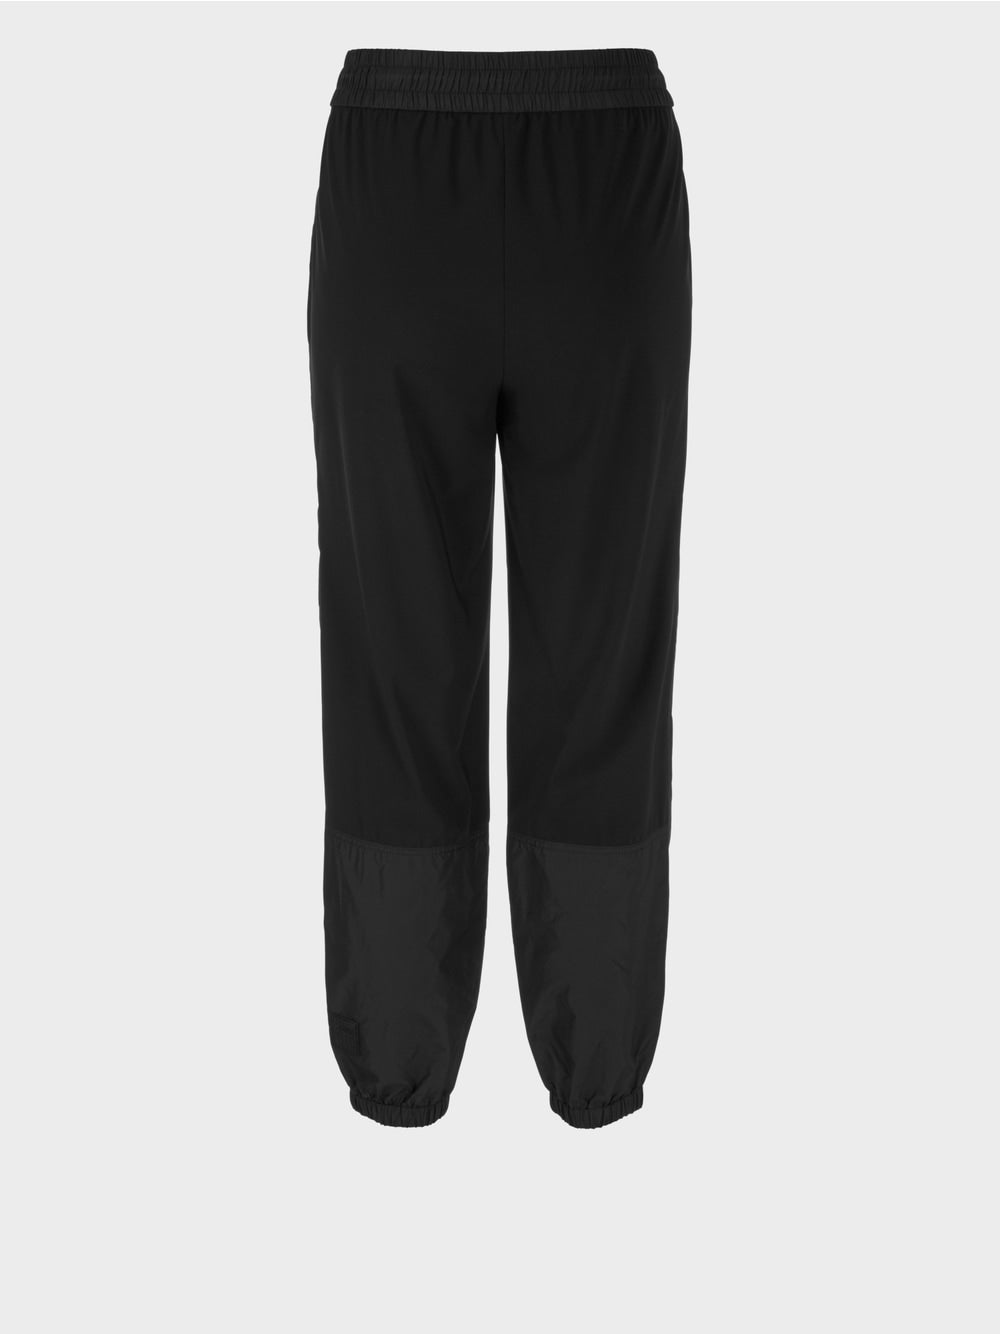 Marc Cain Black ROYE pants in material mix